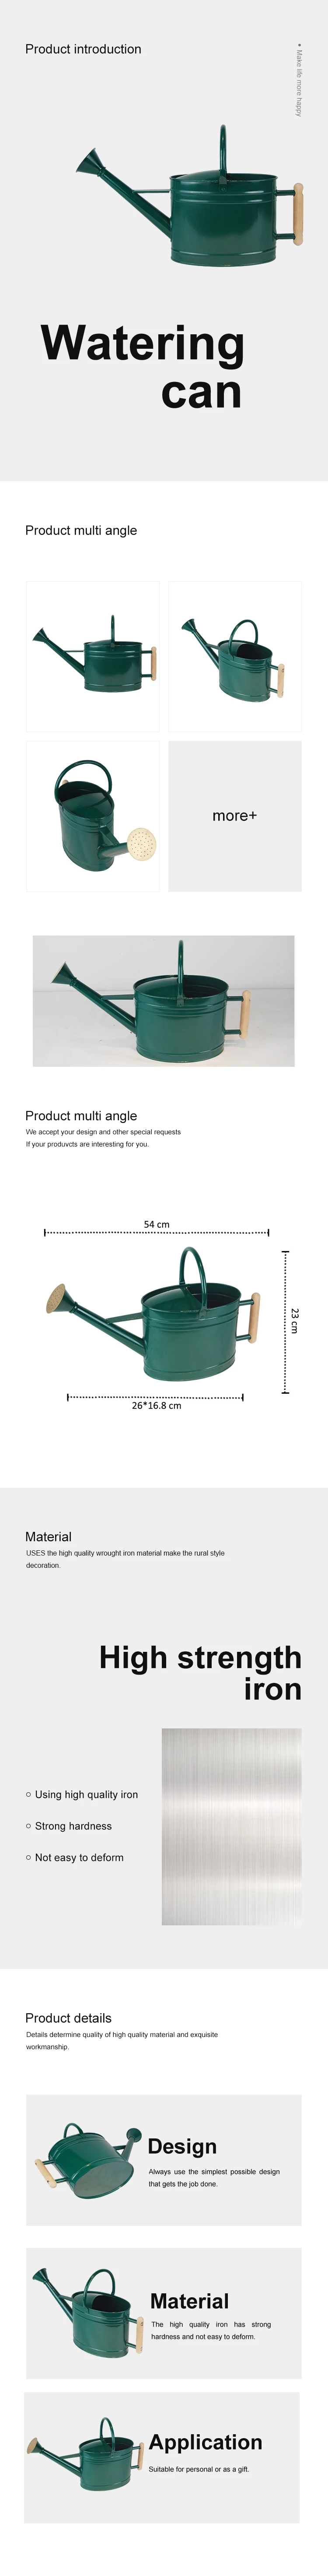 1.5 Gallon Oval Metal Watering Can Galvanized Steel Watering Pot with Removable Spray Spout Movable Upper Handle